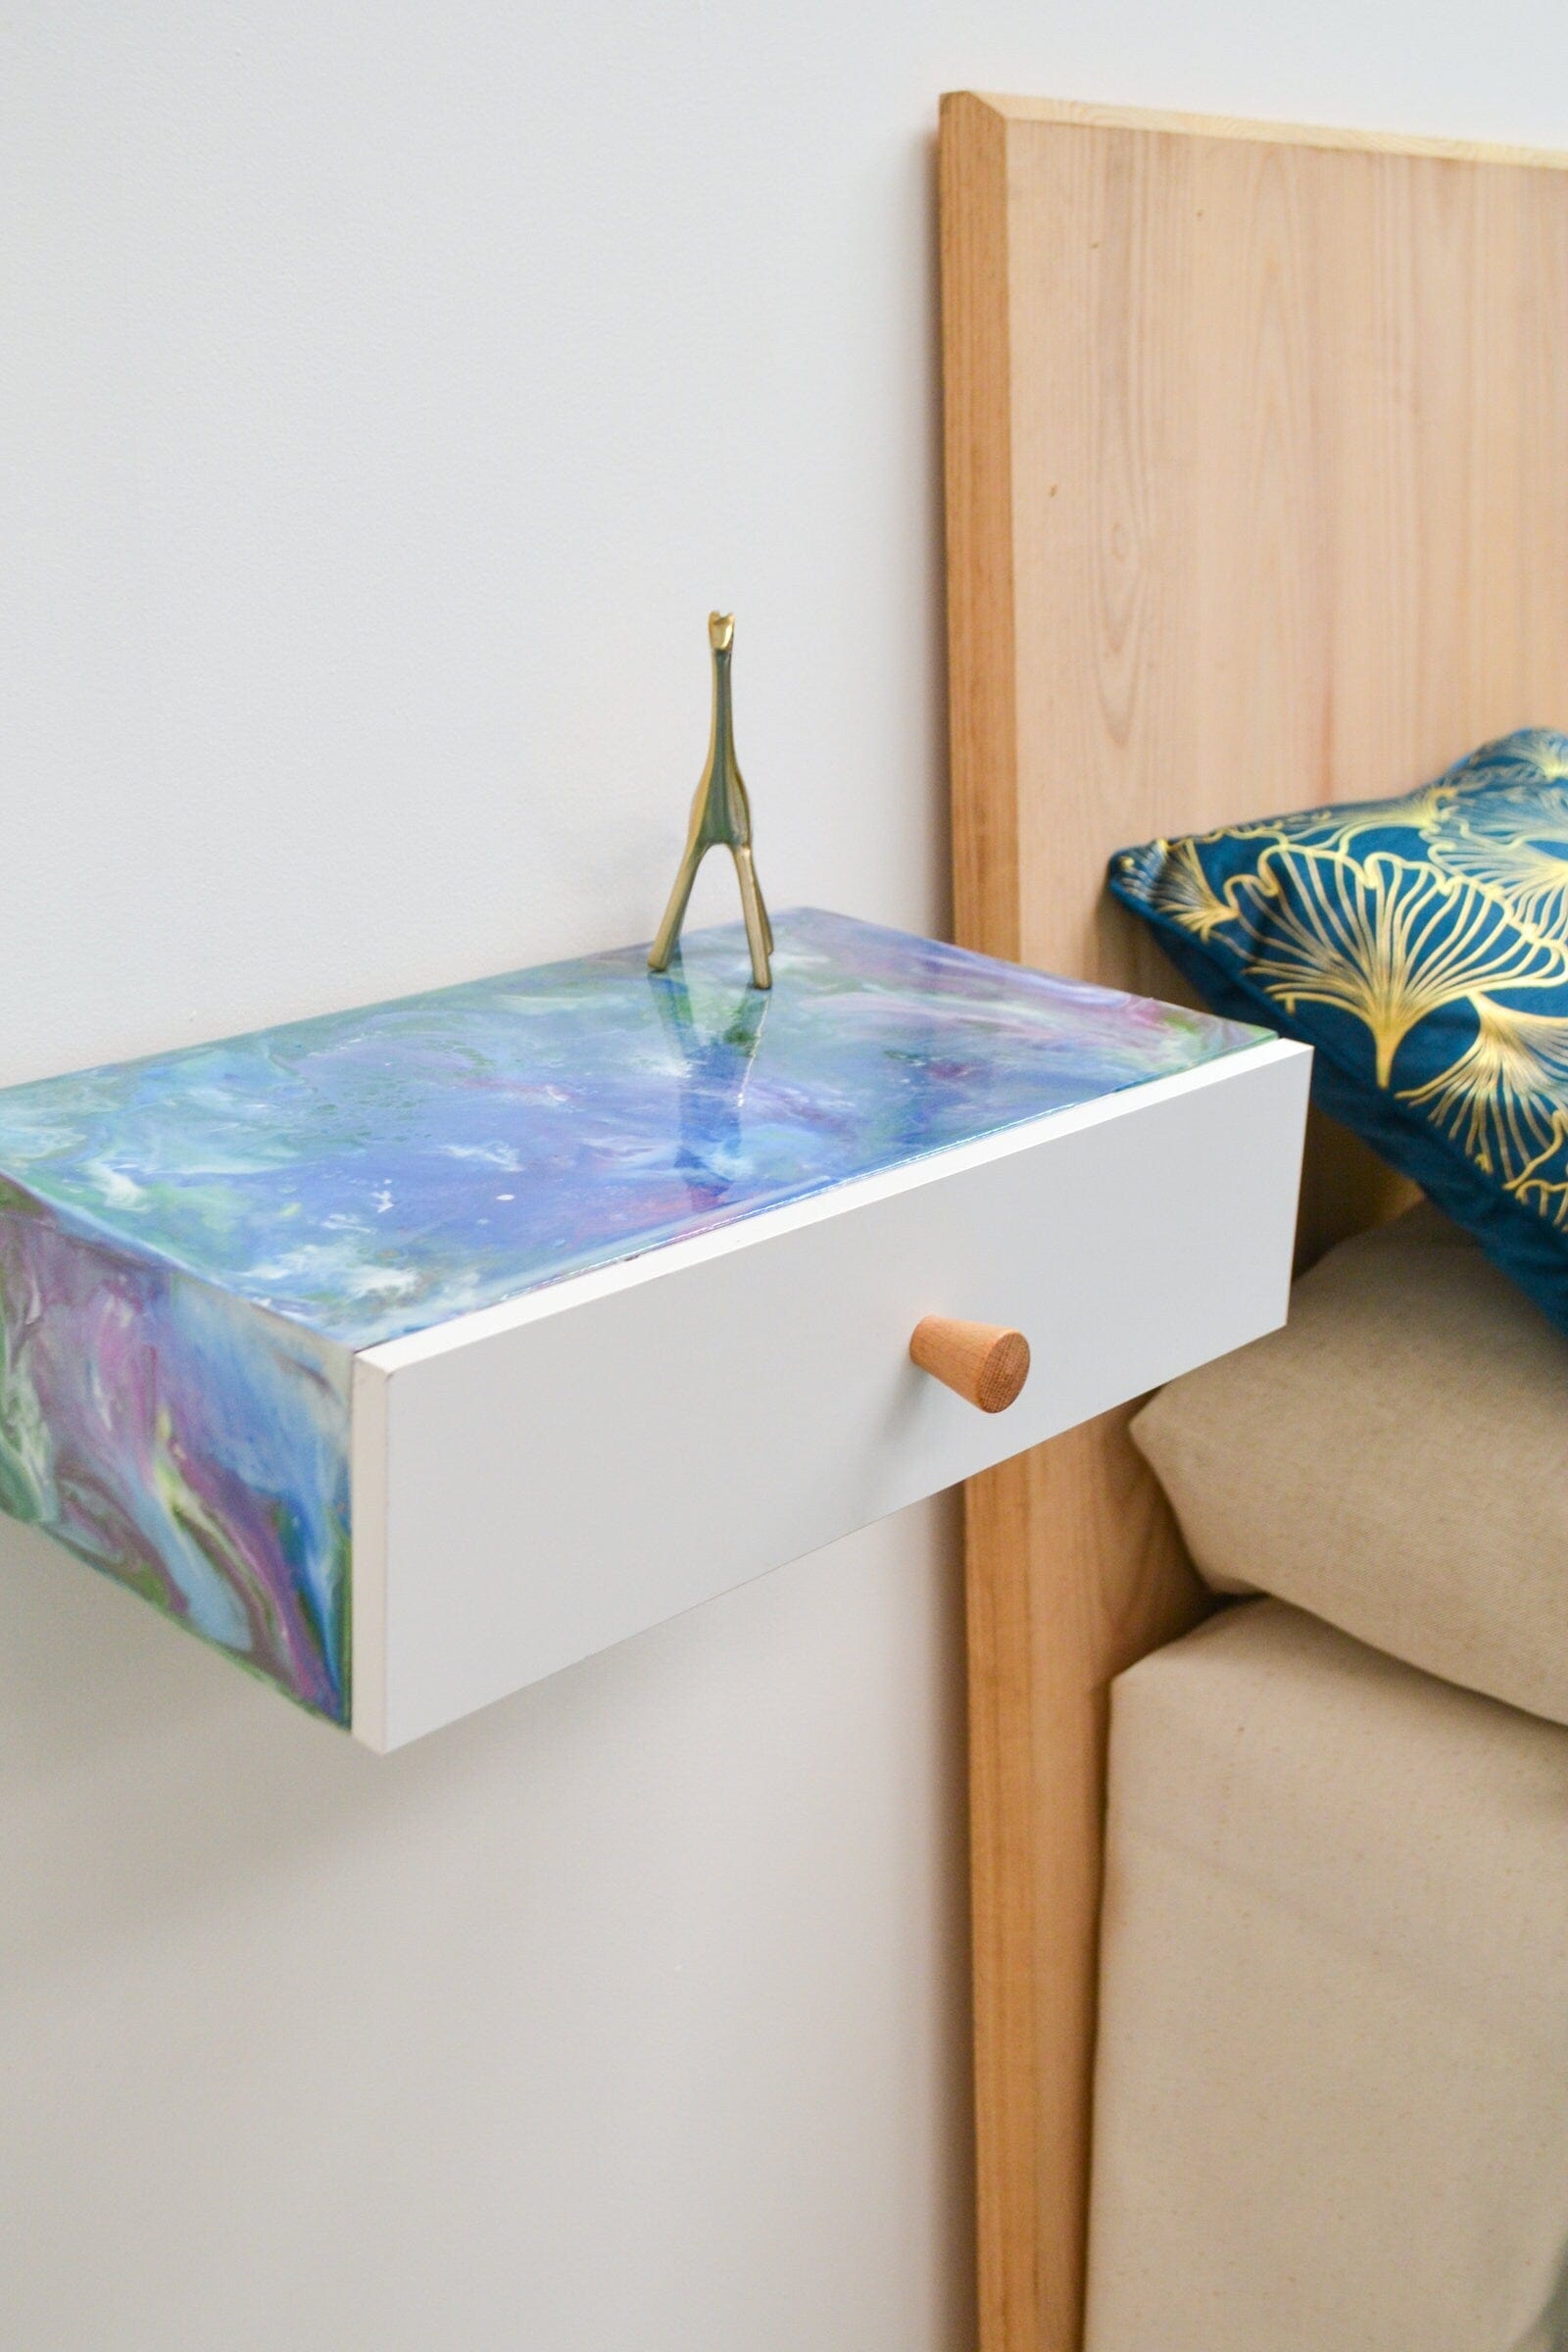 Resin Art Floating Bedside Drawer, small bedside wall hanging nightstand